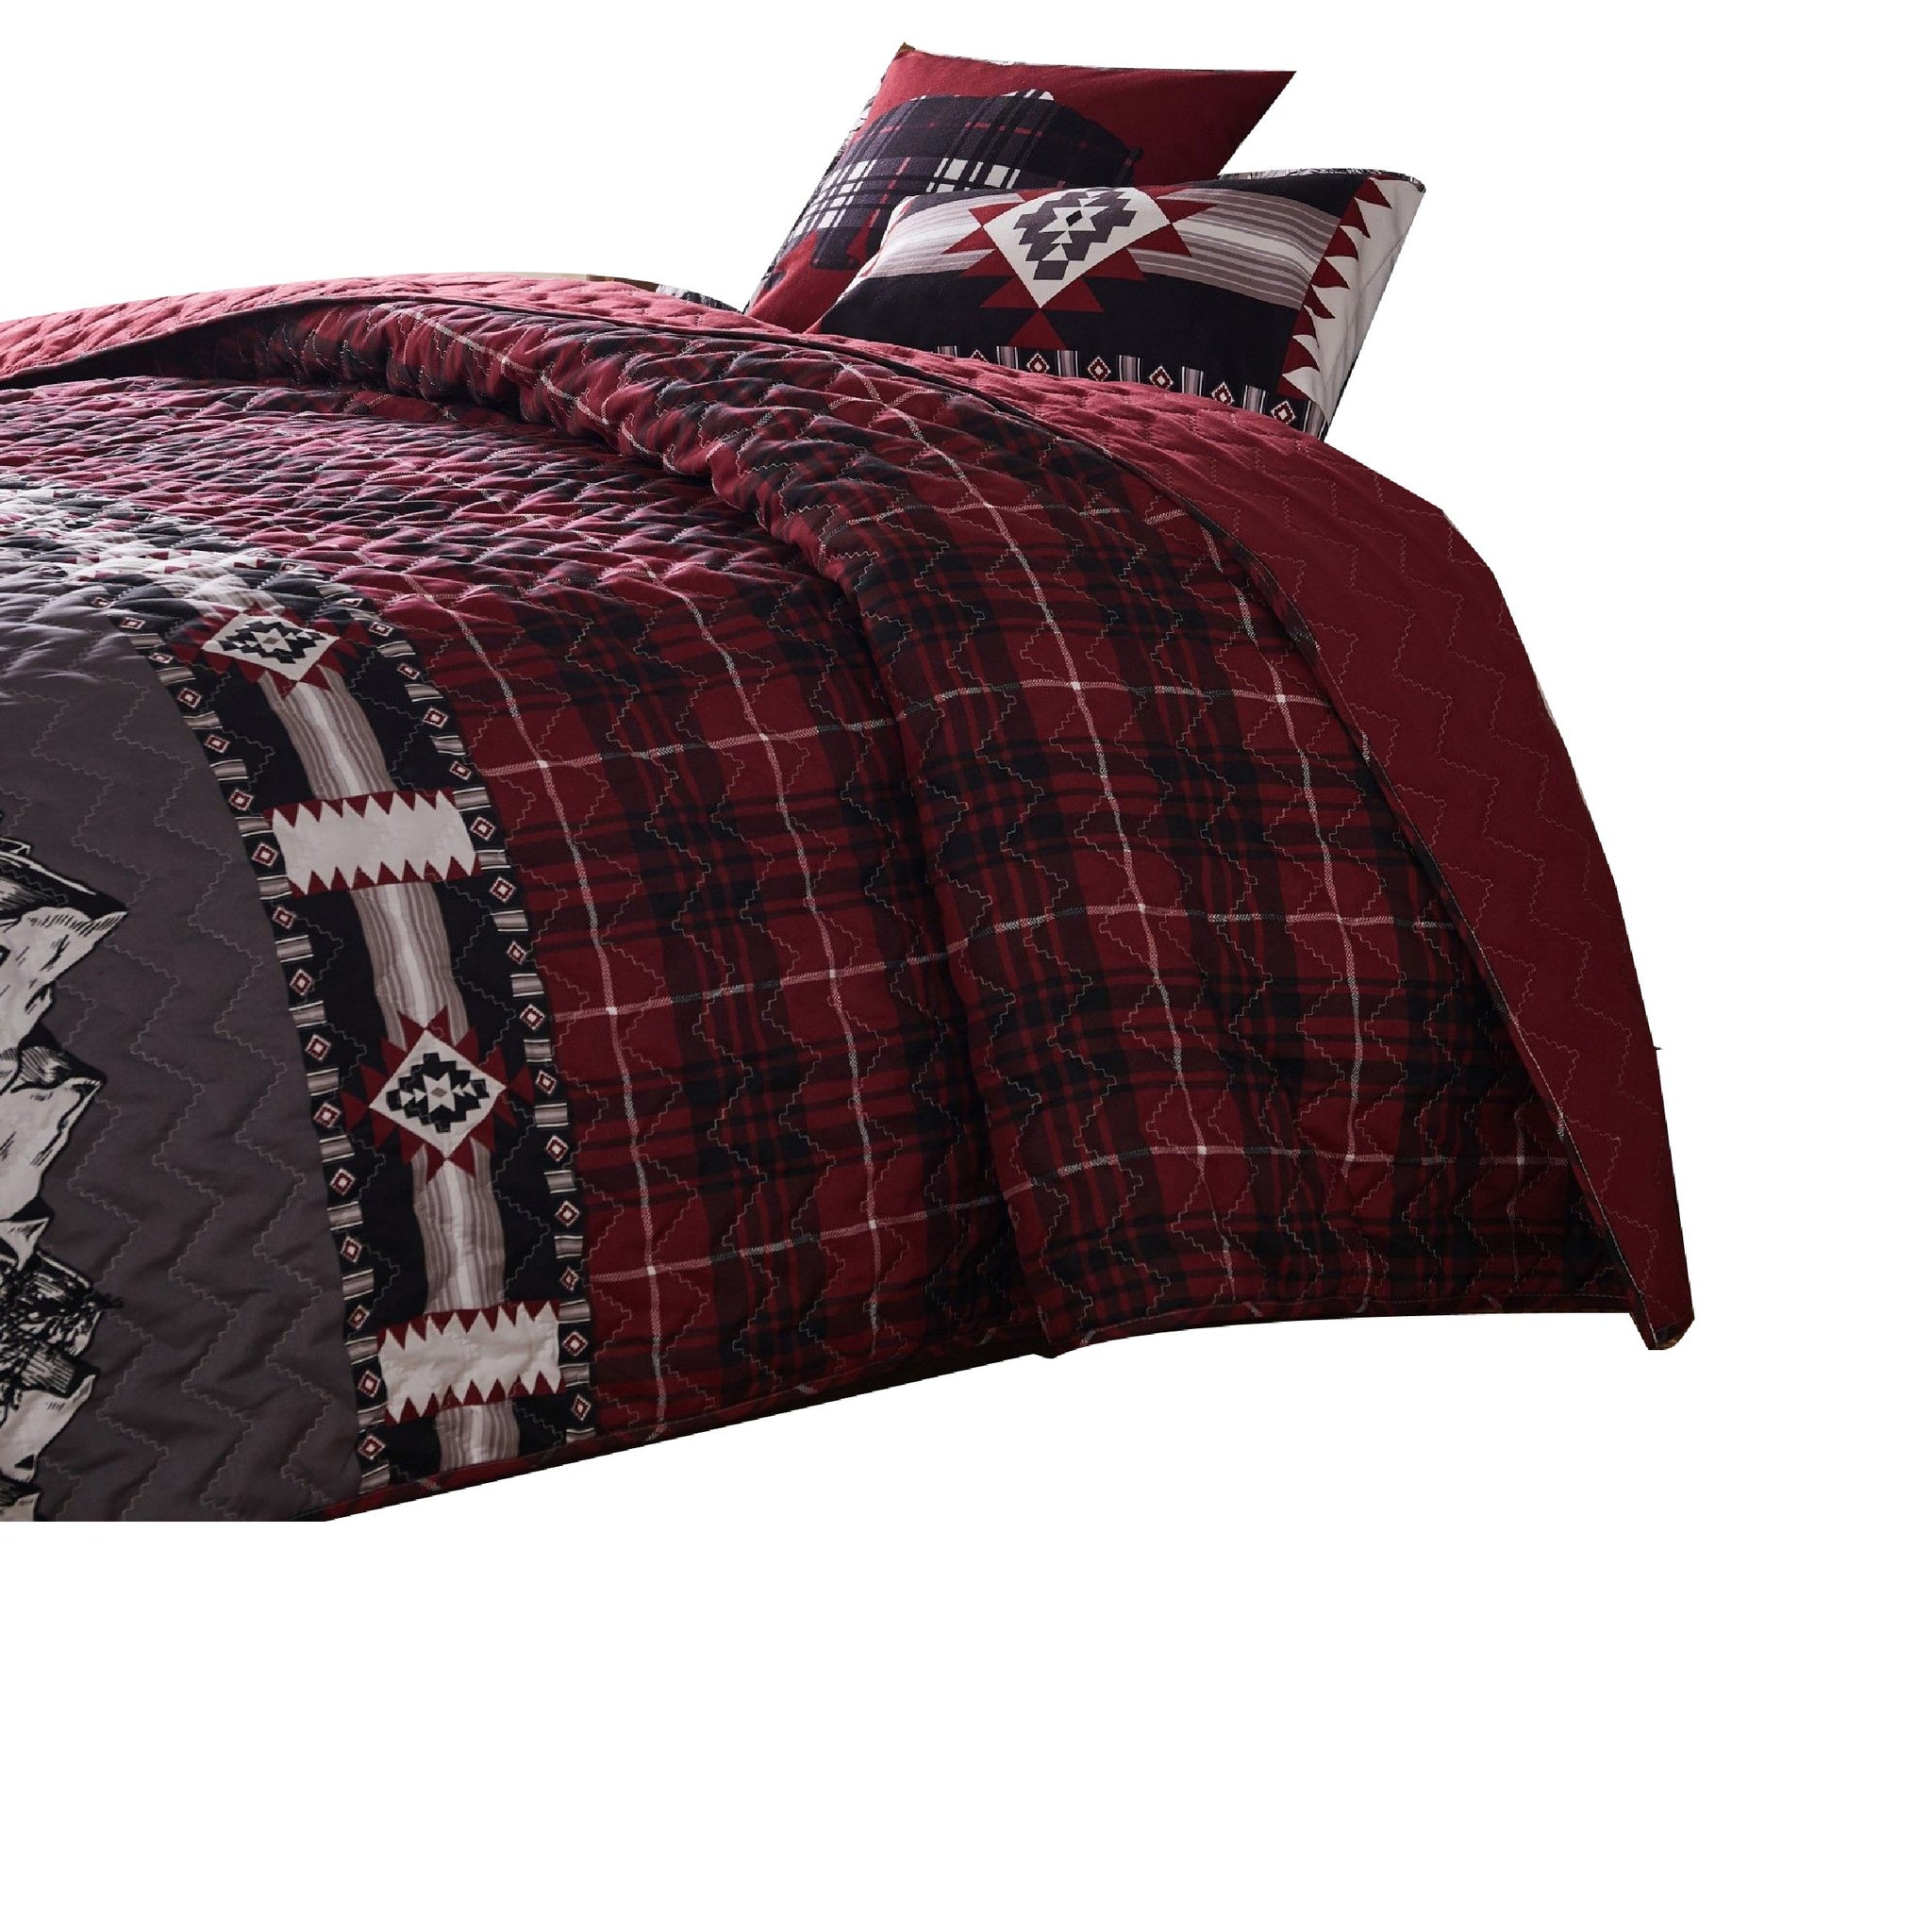 2 Piece Twin Quilt Set with Bear and Plaid